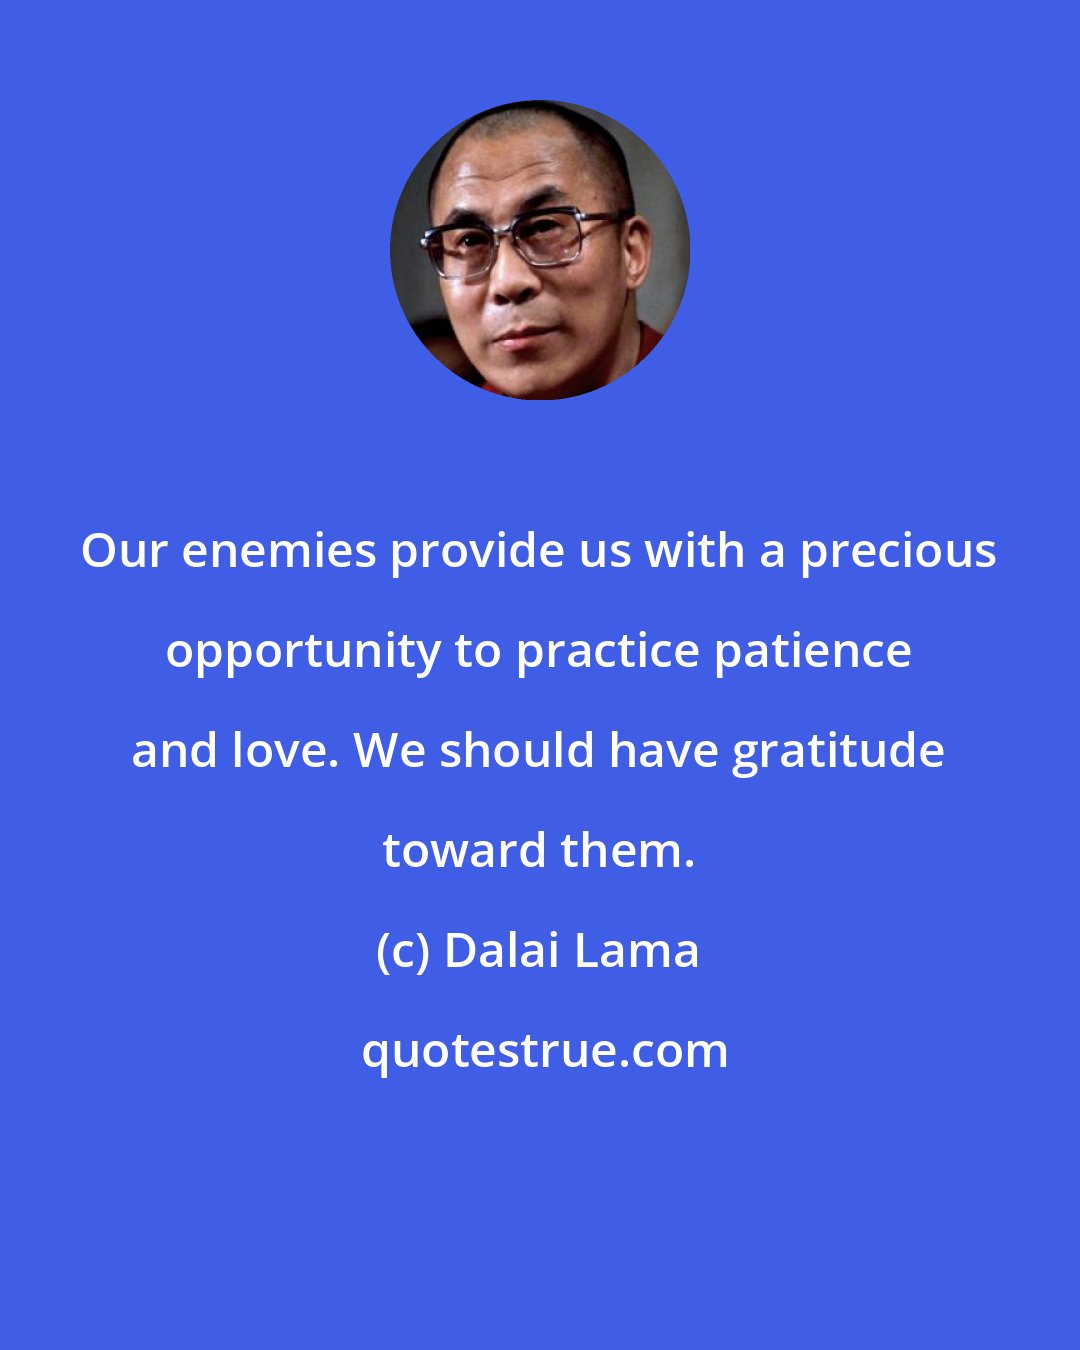 Dalai Lama: Our enemies provide us with a precious opportunity to practice patience and love. We should have gratitude toward them.